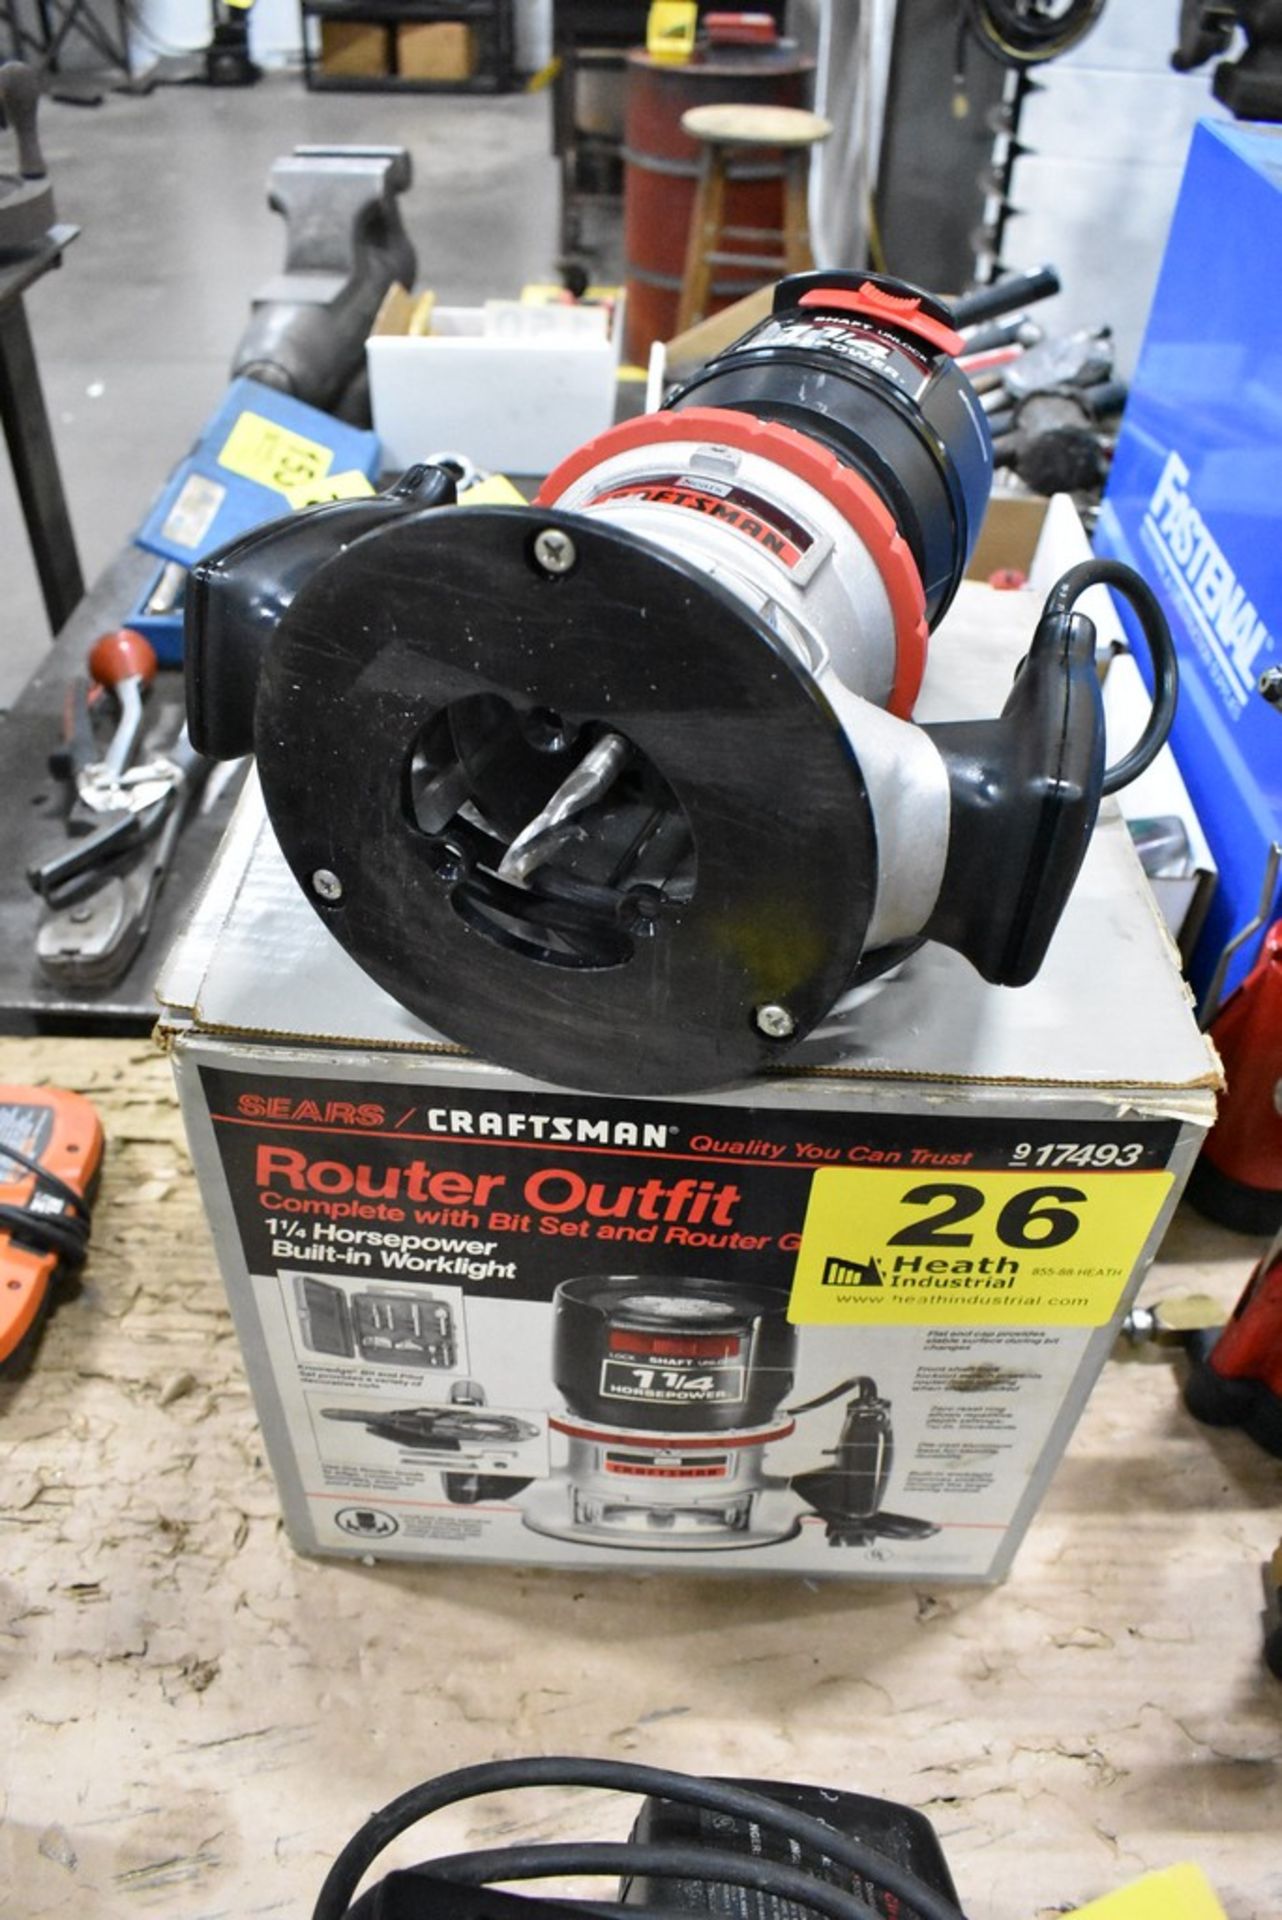 SEARS CRAFTSMAN 1-1/4 HP ROUTER